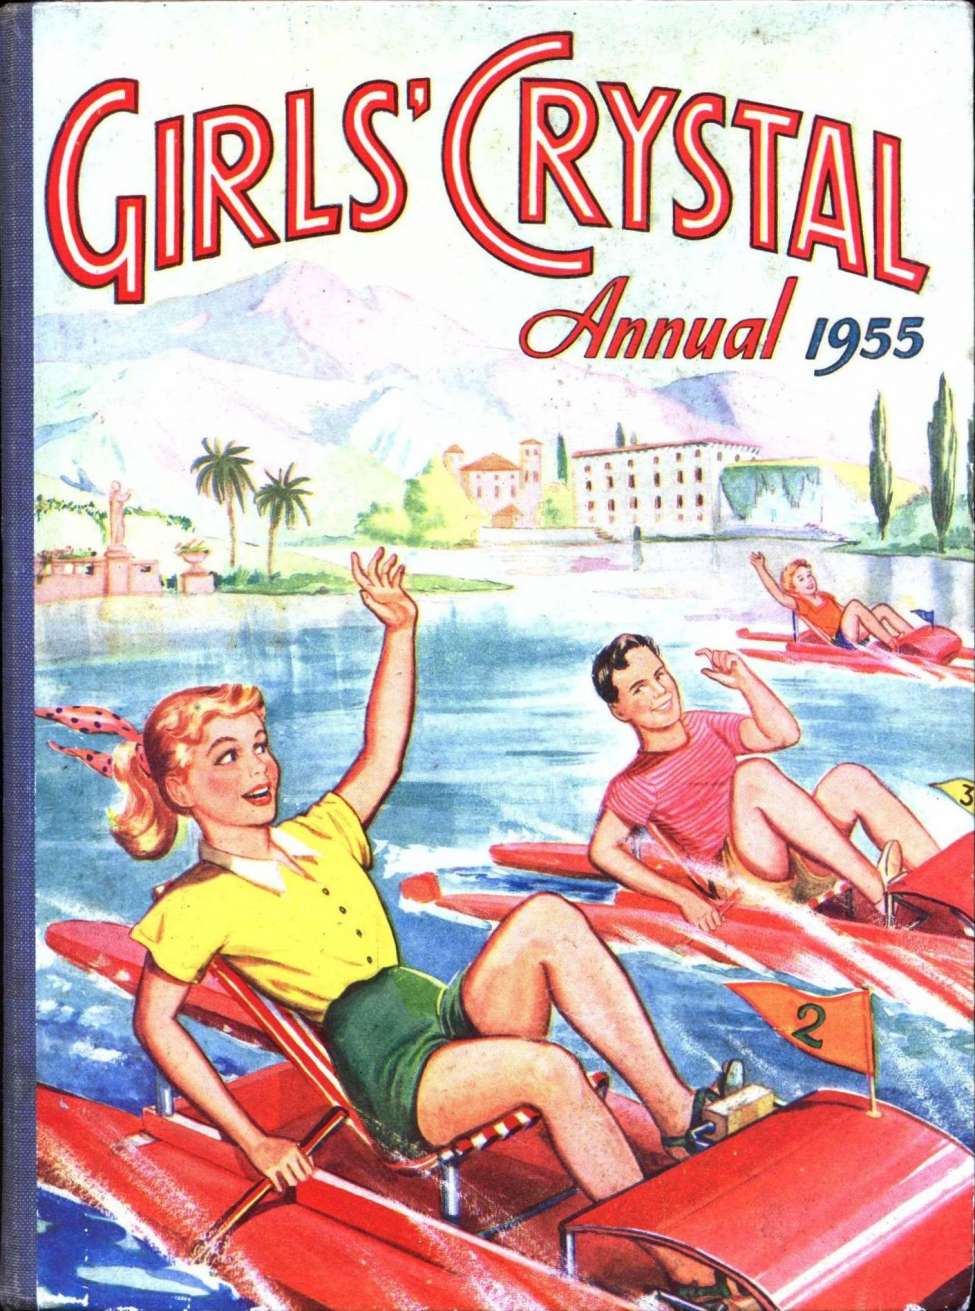 Comic Book Cover For Girls' Crystal Annual 1955